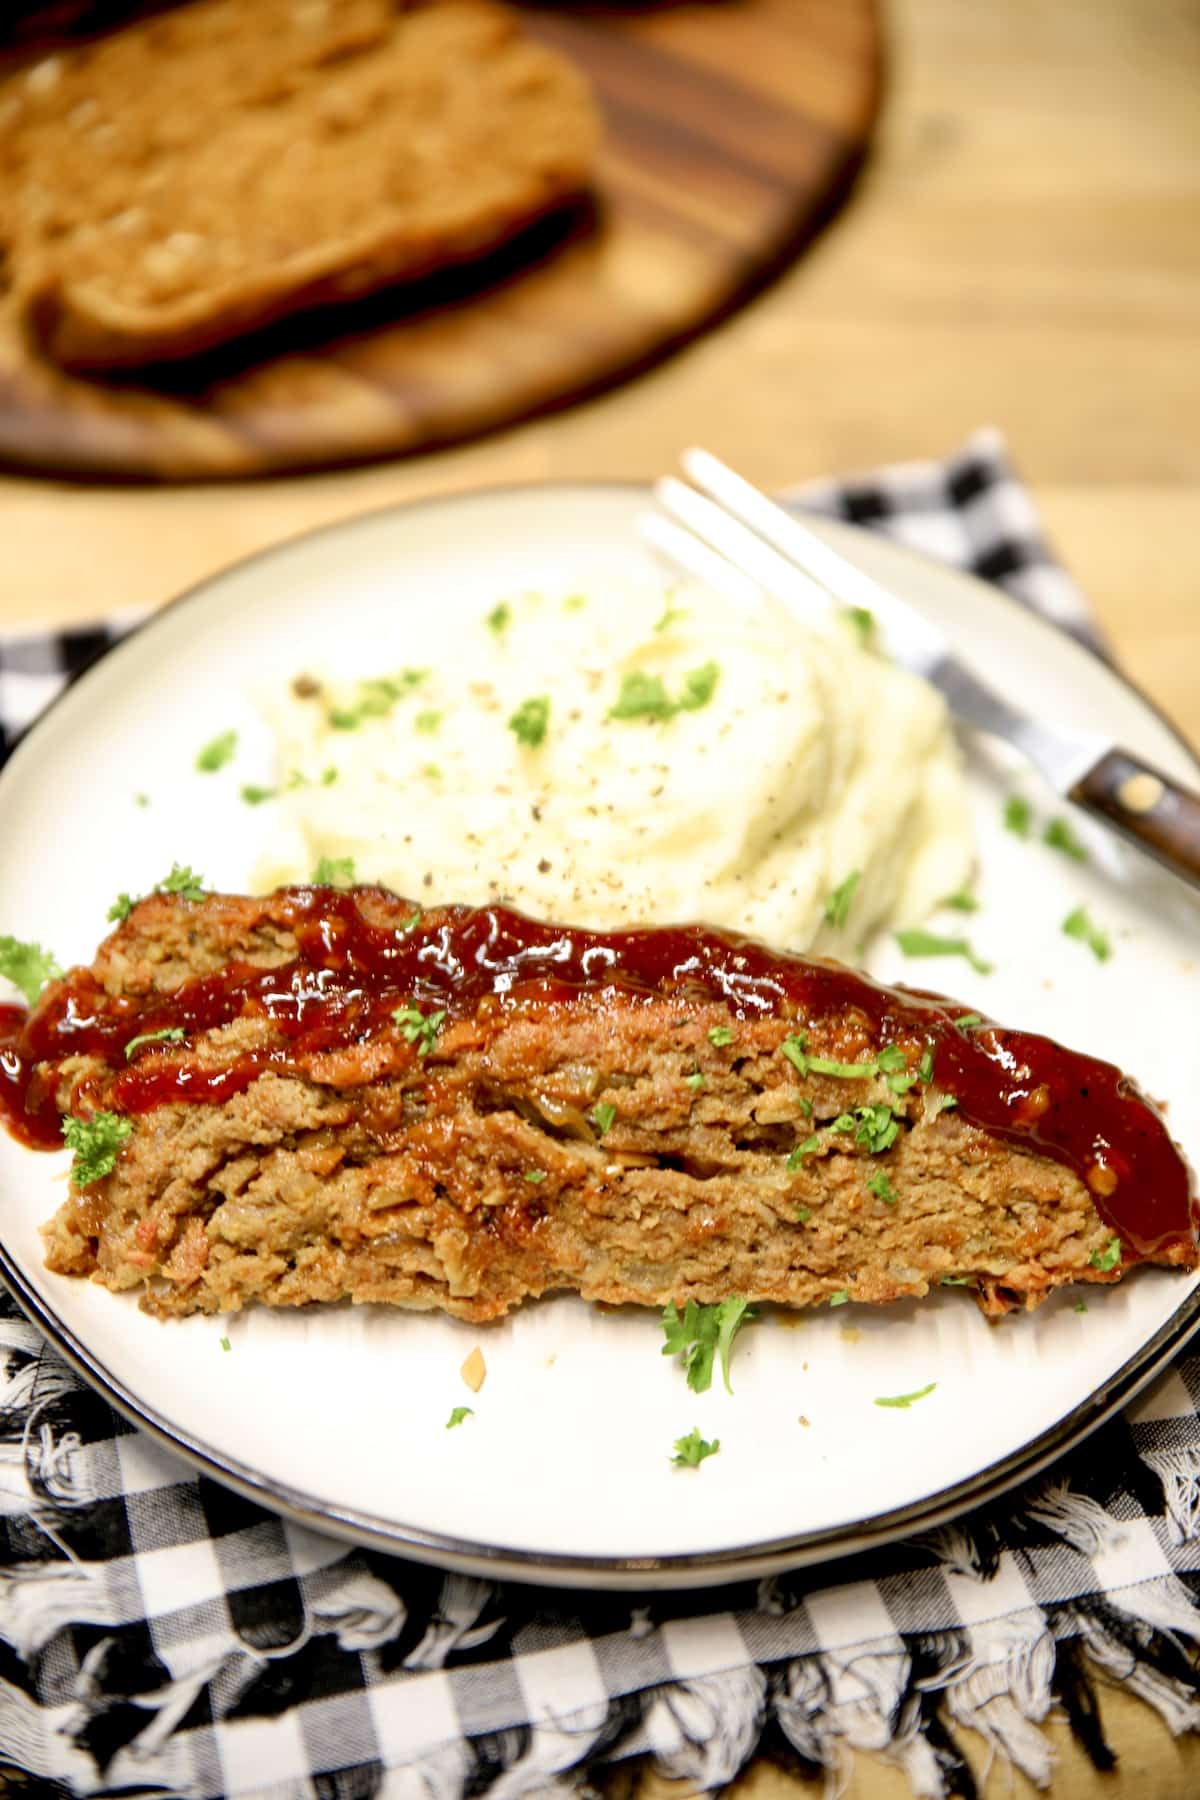 Plate of meatloaf with mashed potatoes.